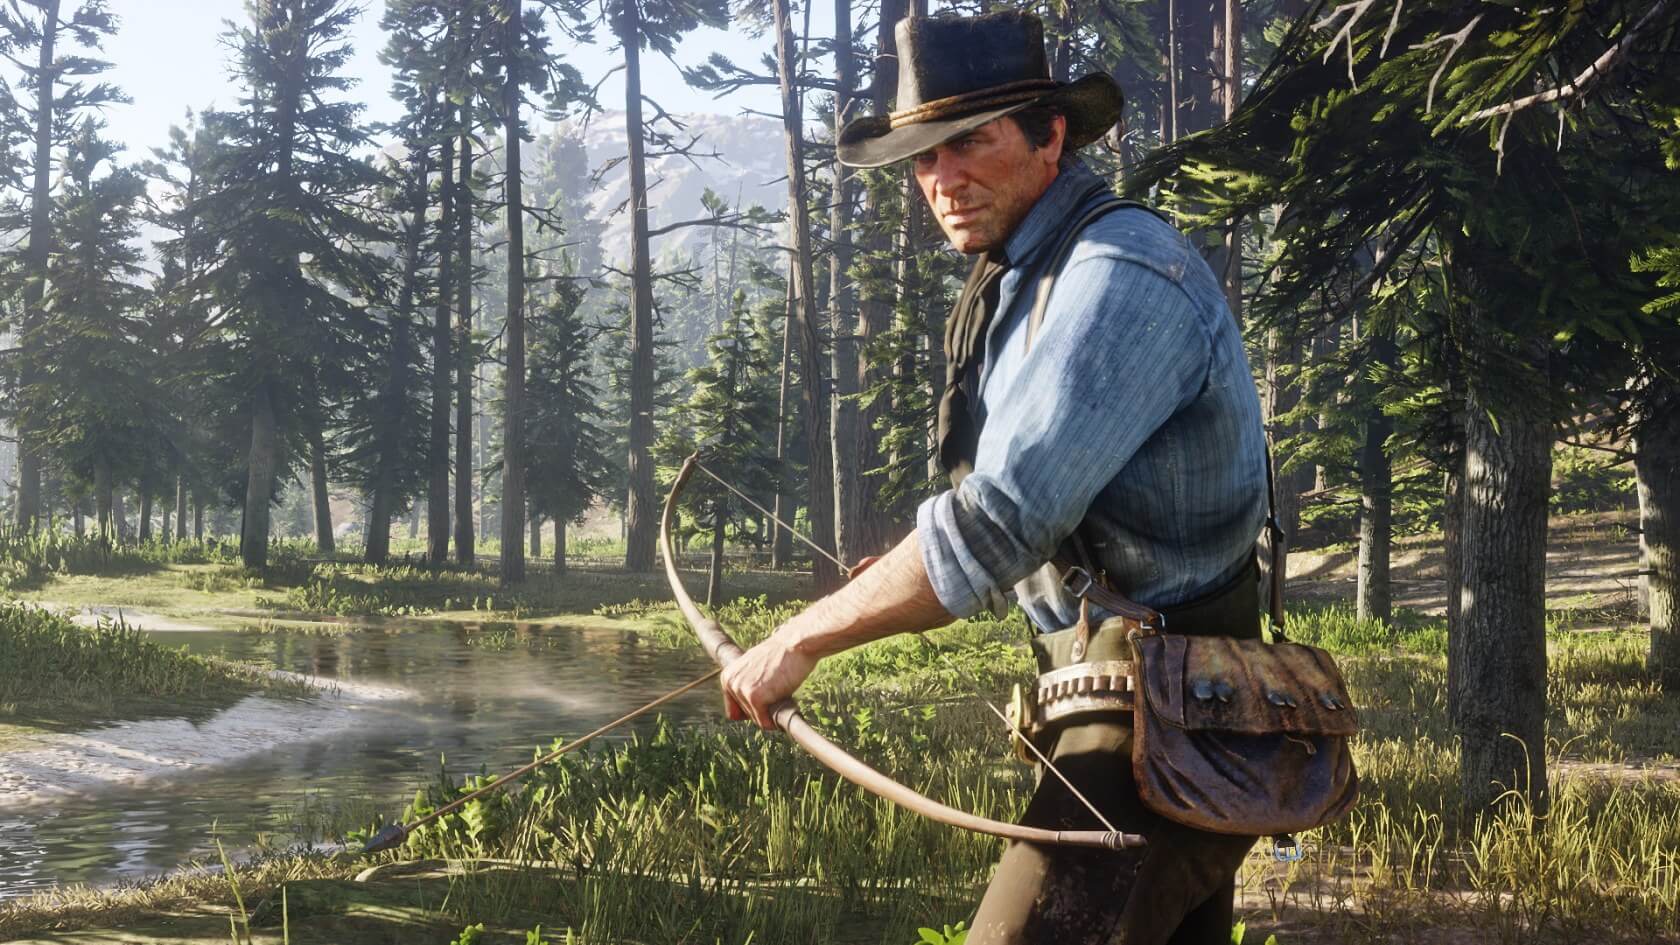 Red Dead Redemption 2 has shipped over 23 million copies since launch